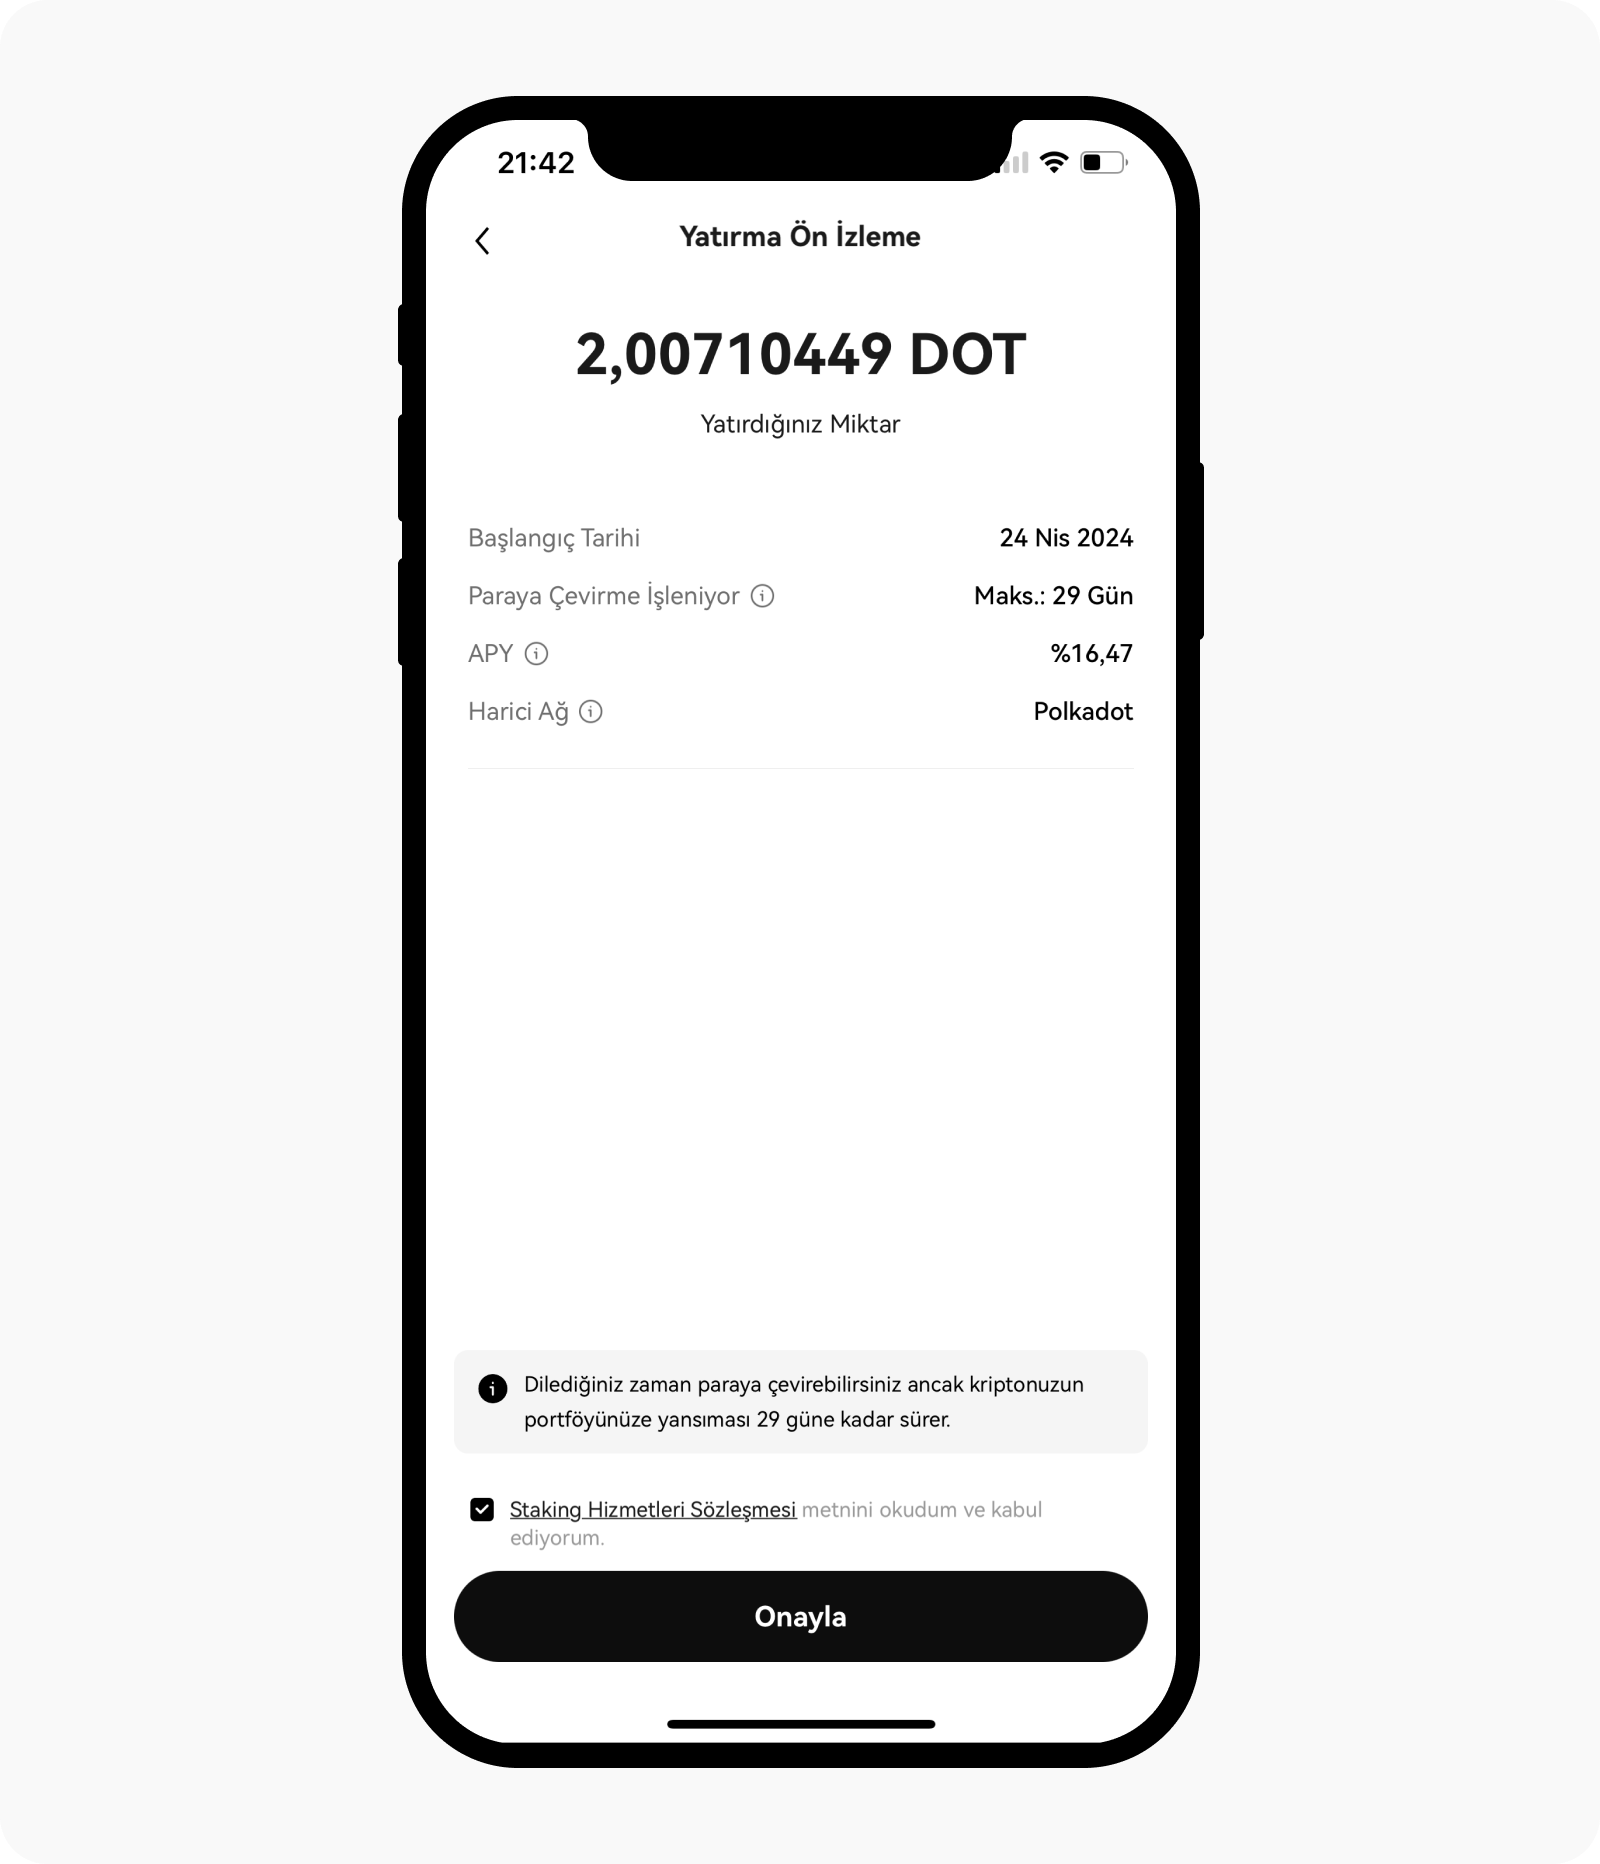 CT-app-tr-TR-on chain earn-staking preview